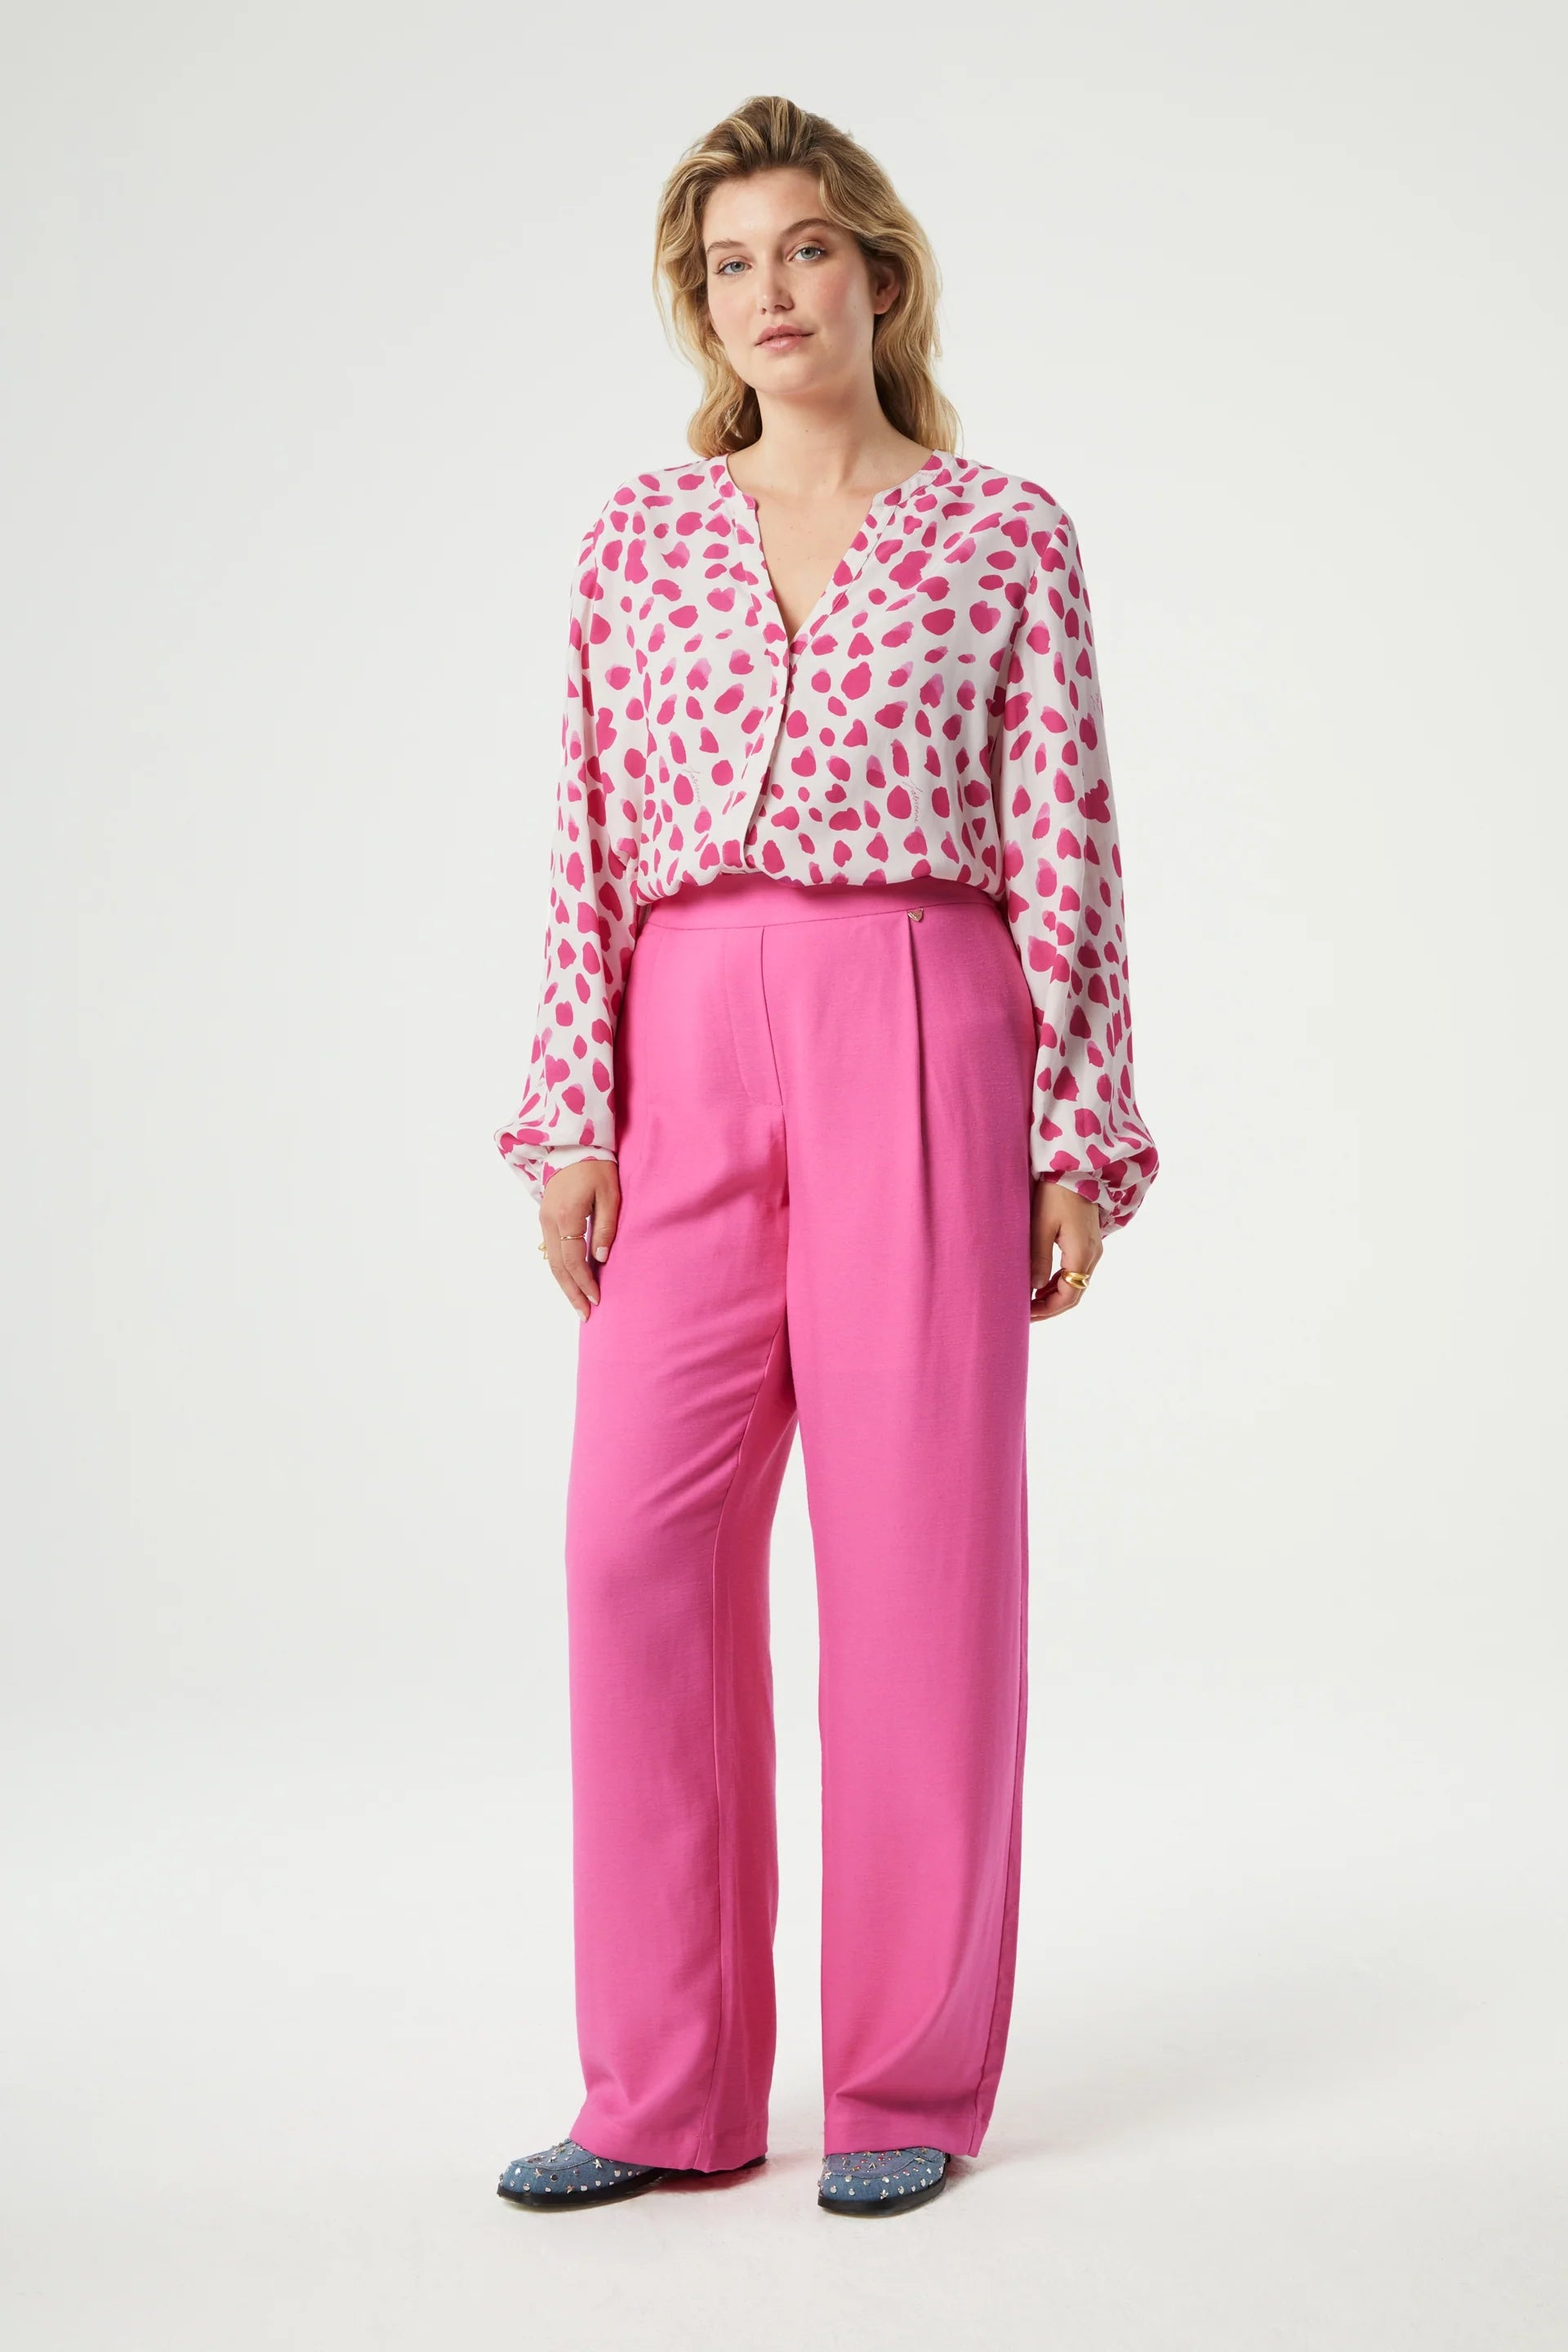 Woman wearing a pink blouse with heart patterns paired with Fabienne Chapot's Neale Trousers in Candy Pink.